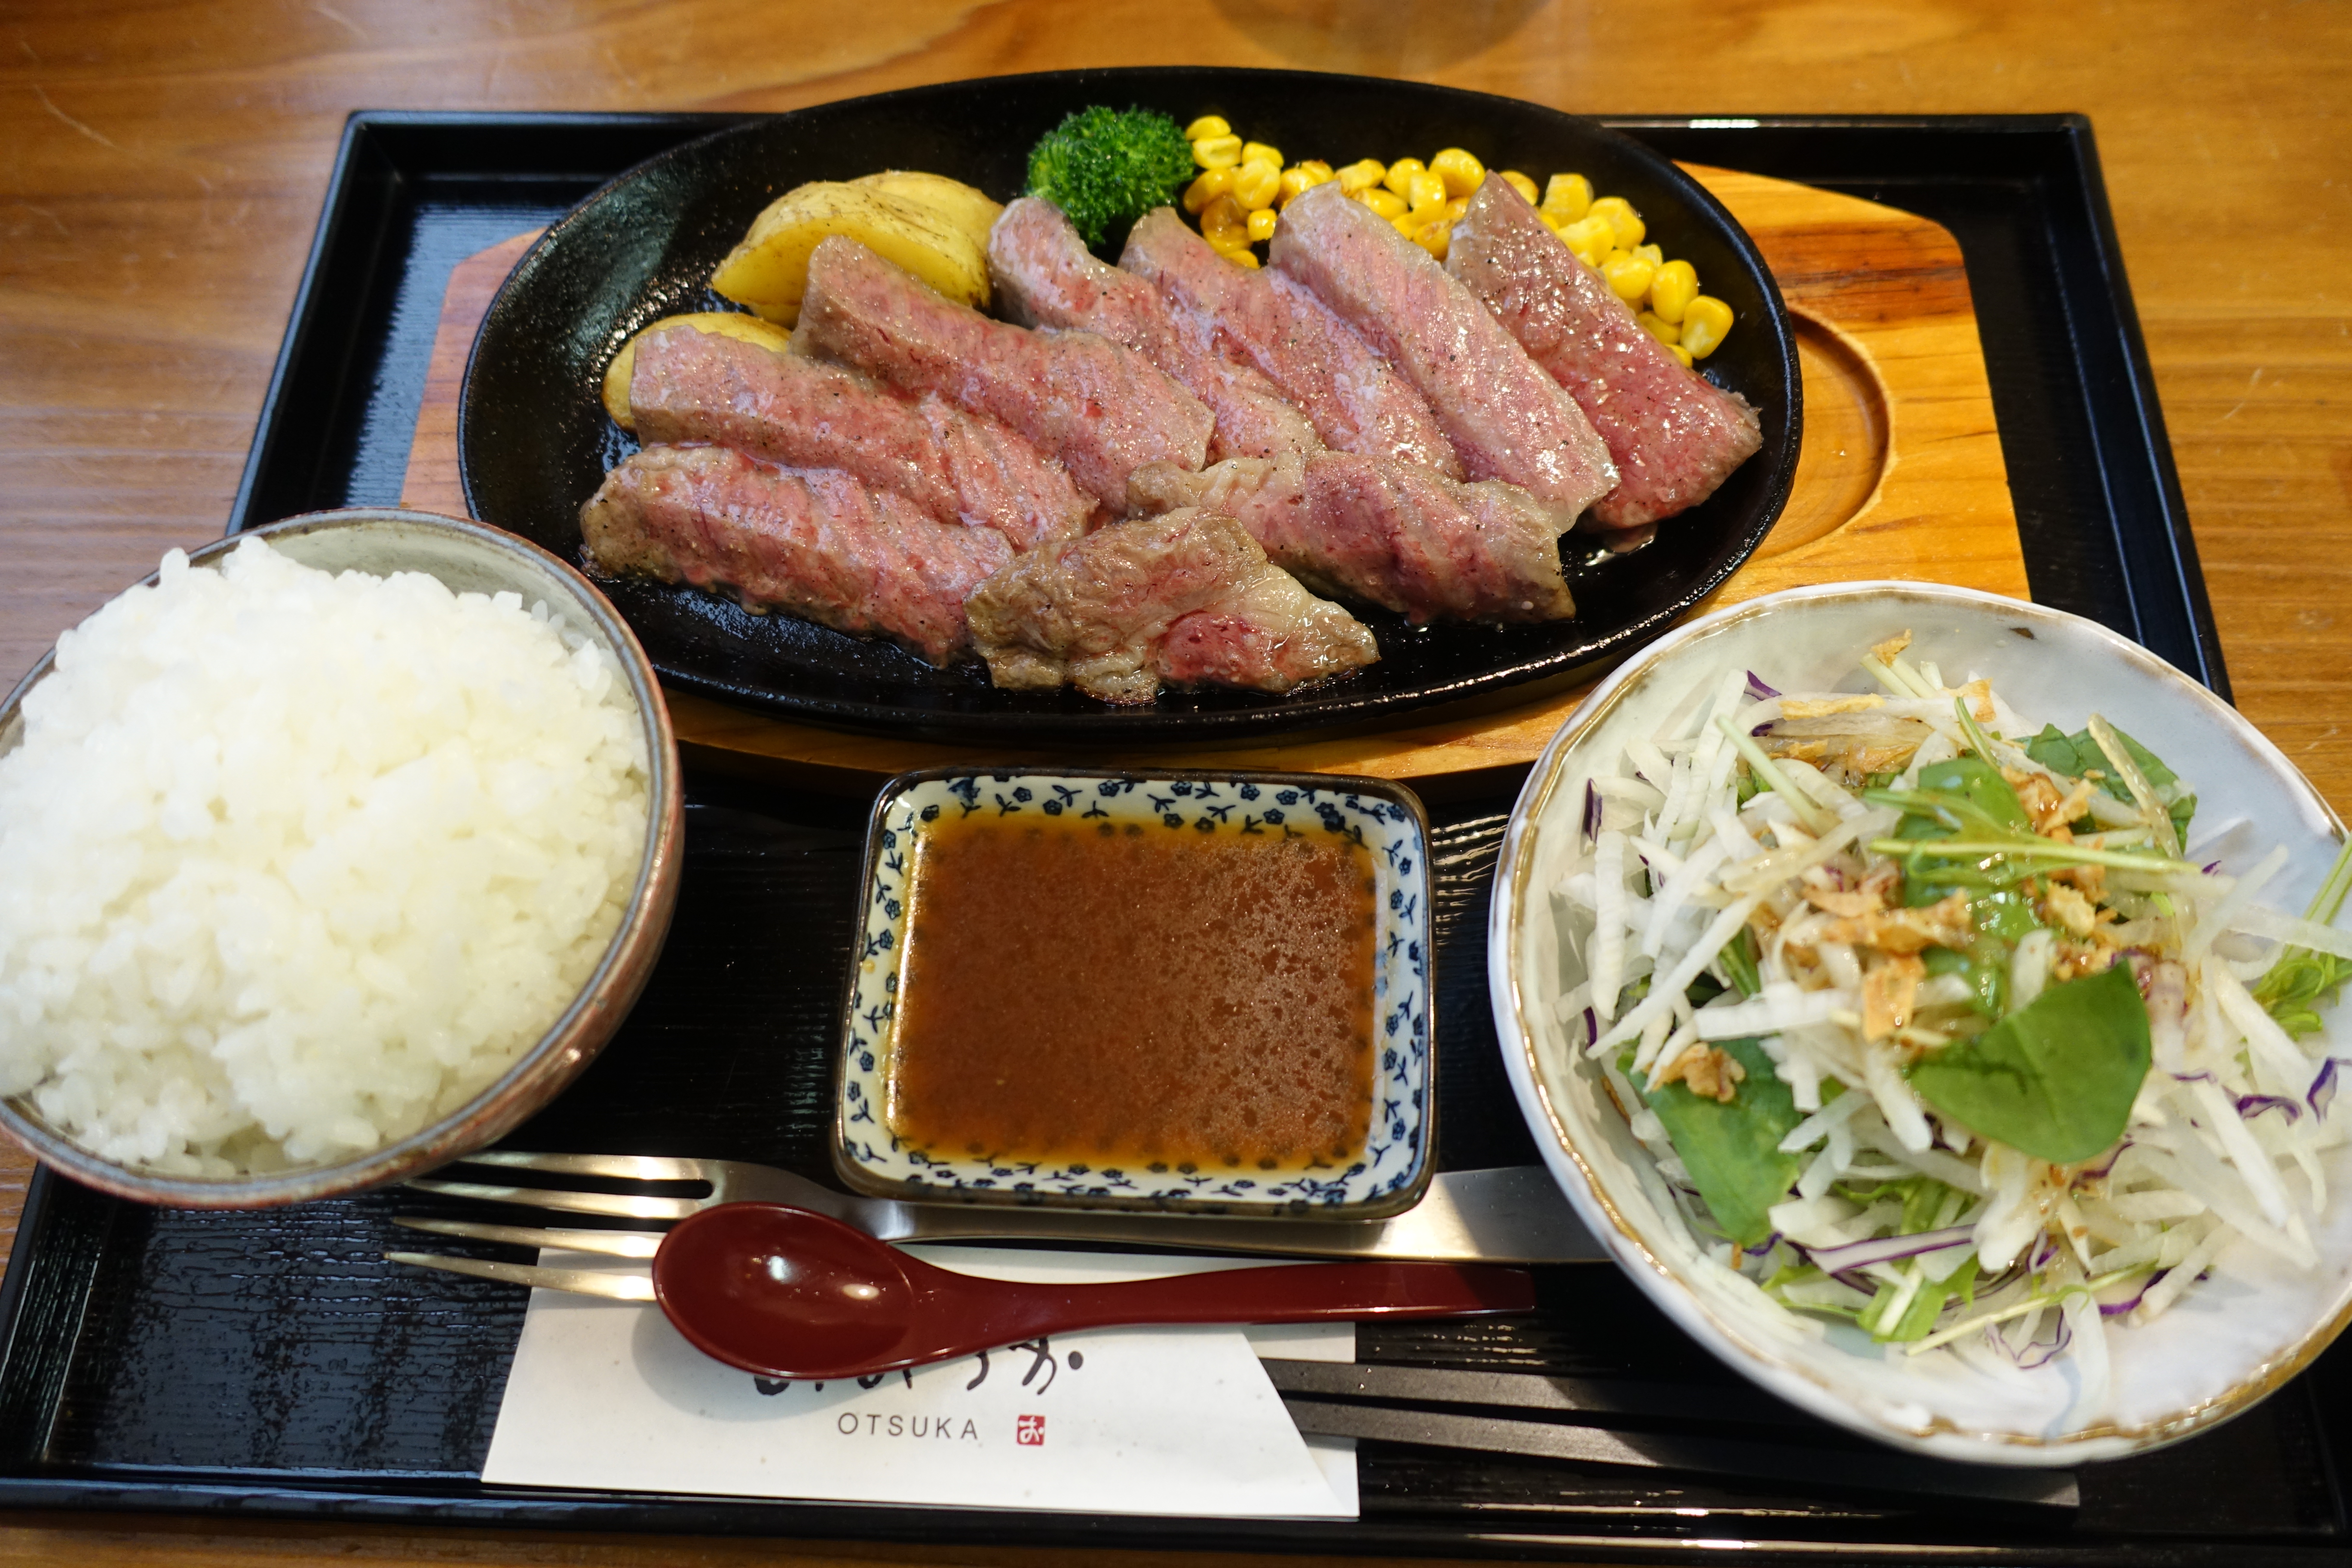 Steak meal served on one tray with rice and salad.